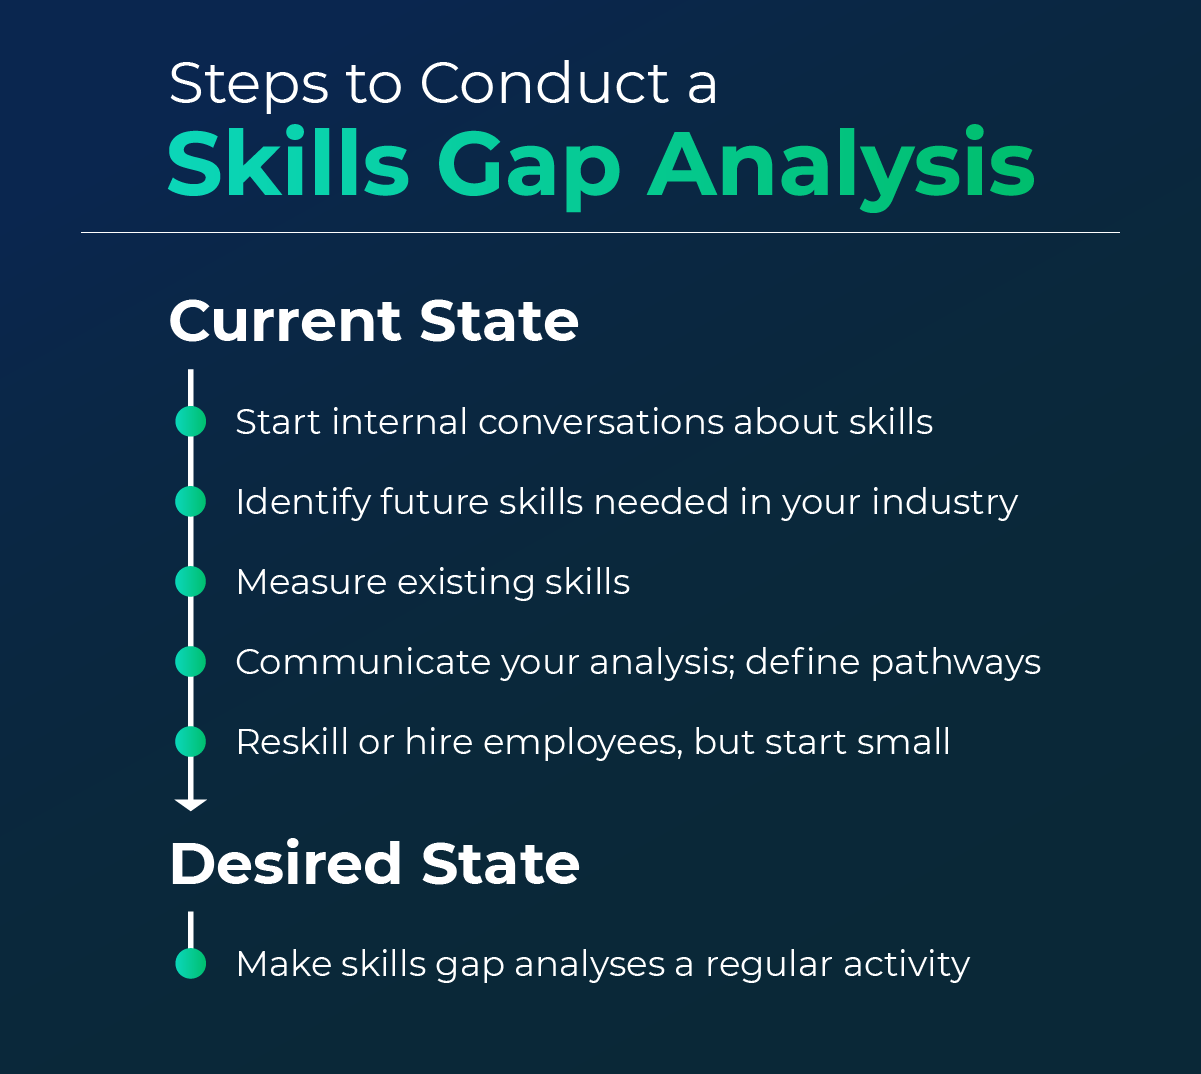 Graphic showing a list of steps to conduct a skills gap analysis